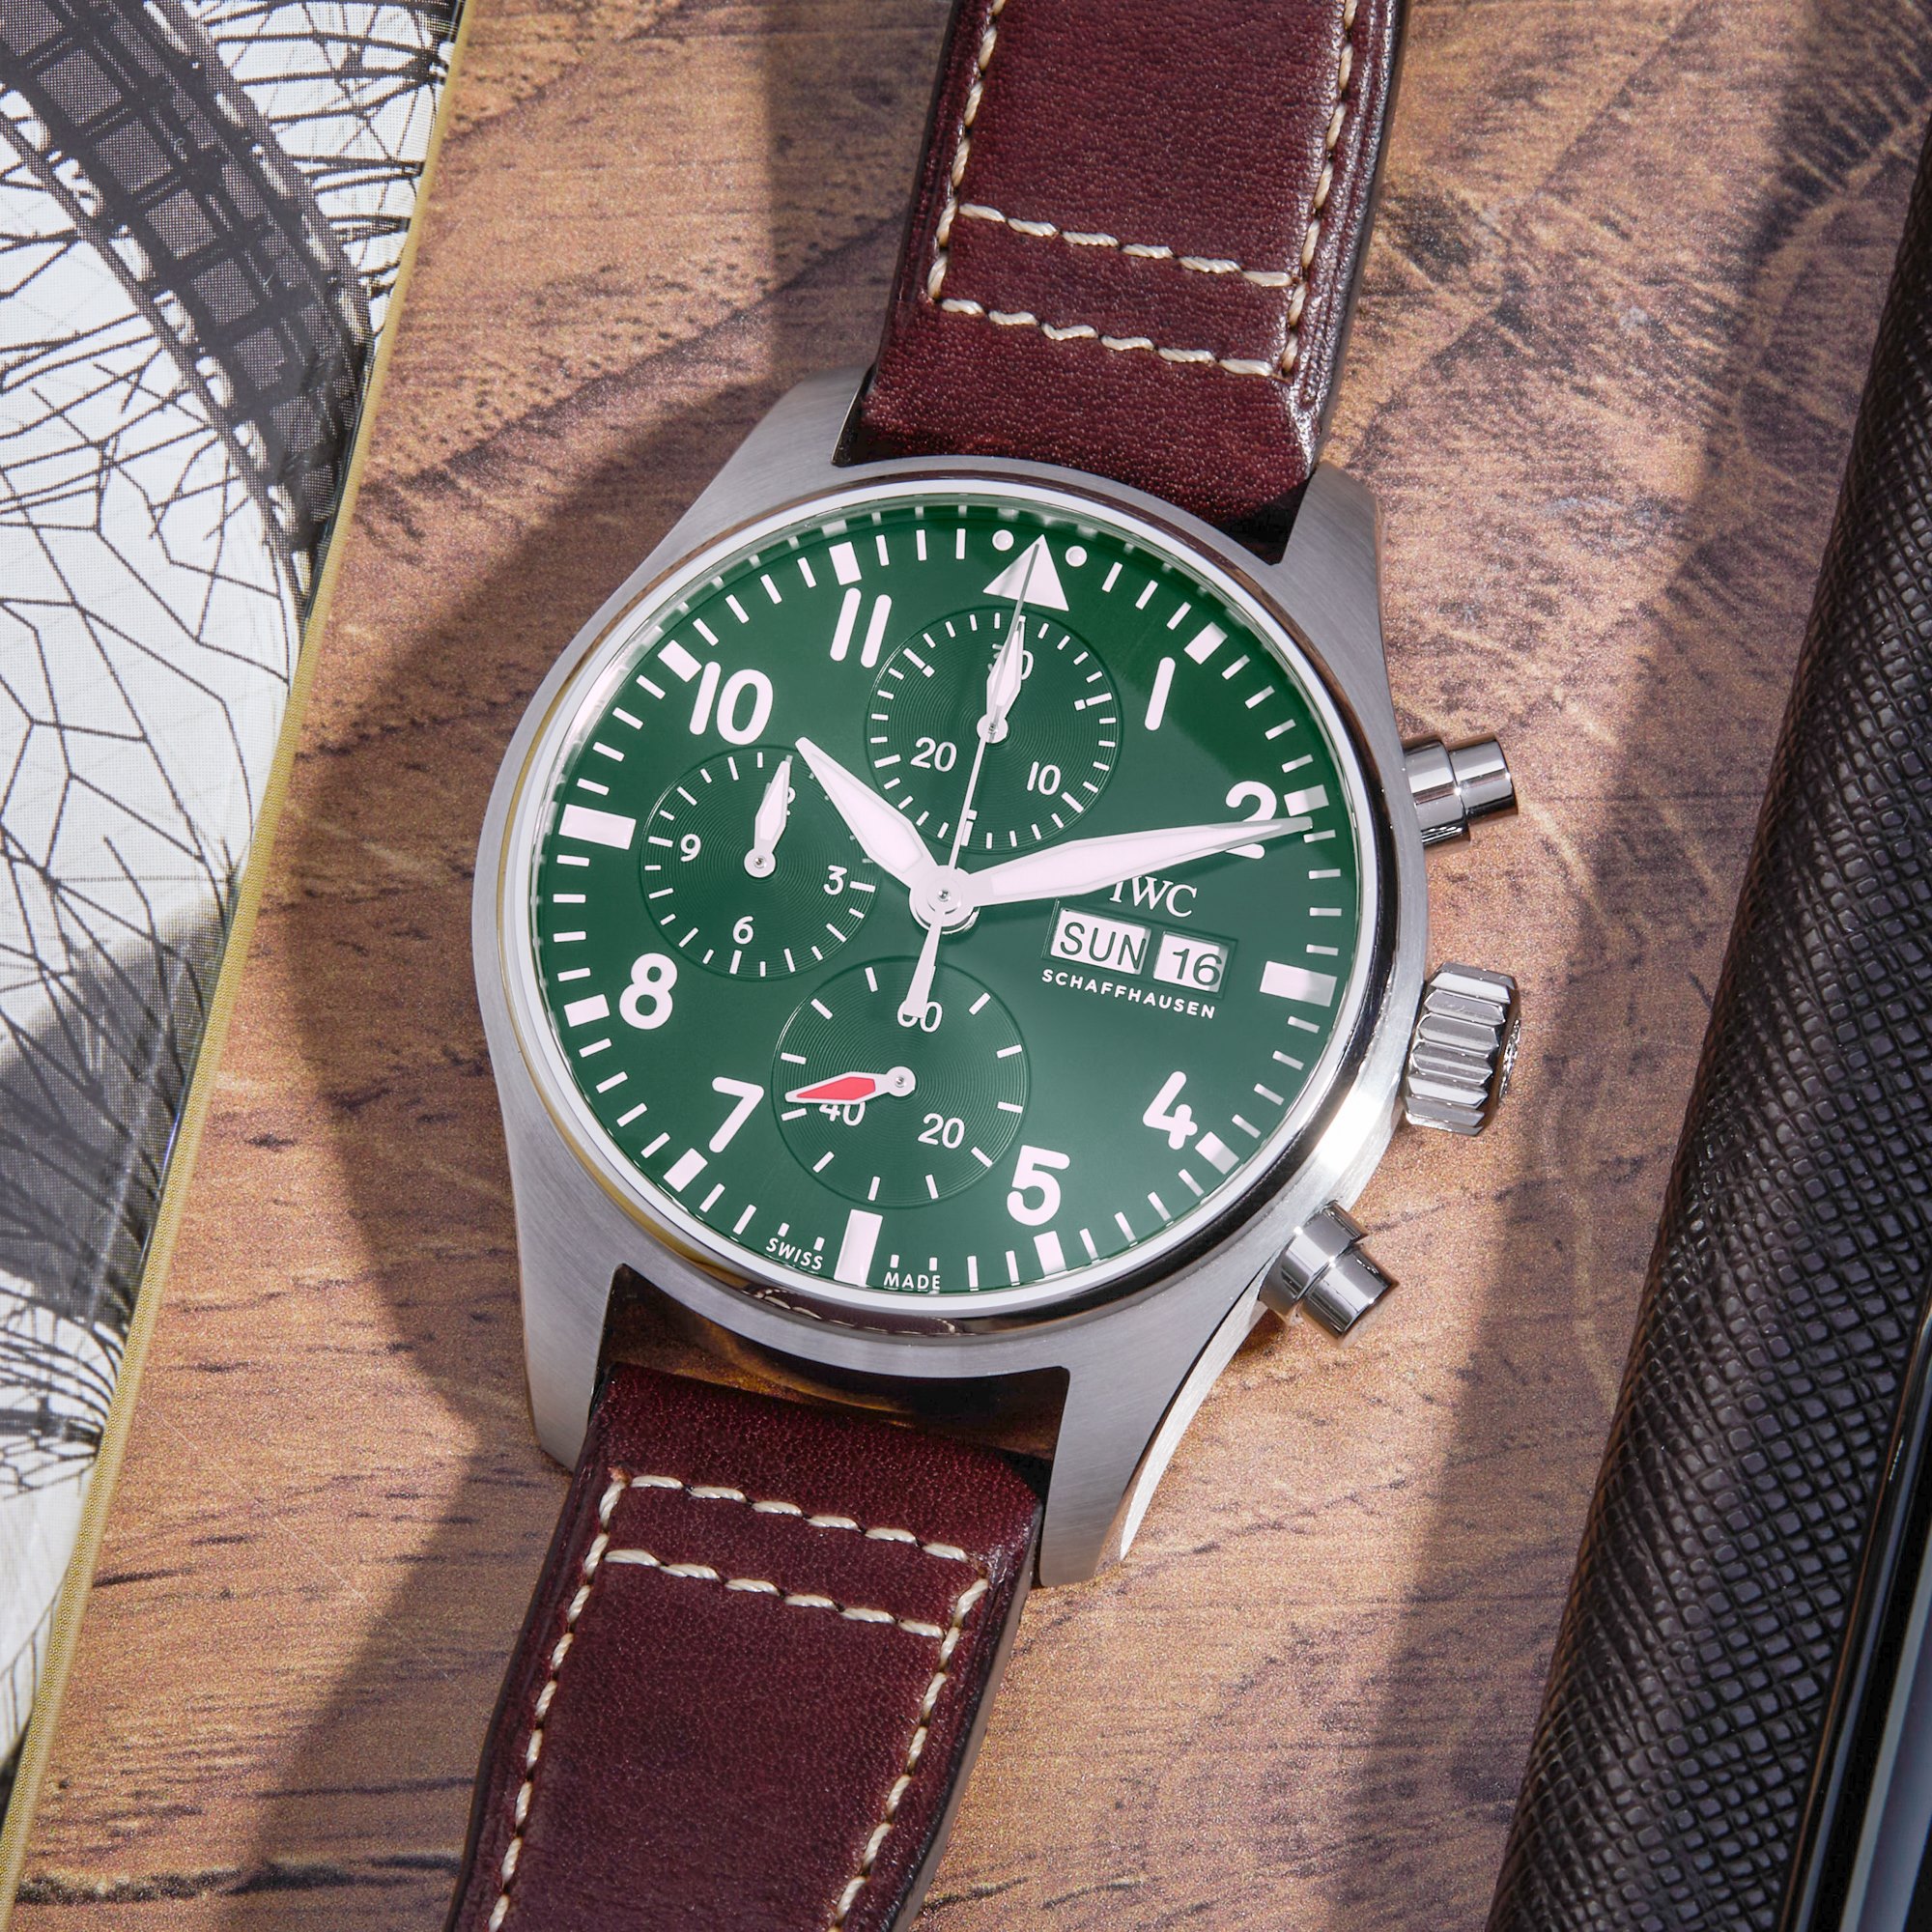 IWC Pilot's Chronograph Stainless Steel IW388103